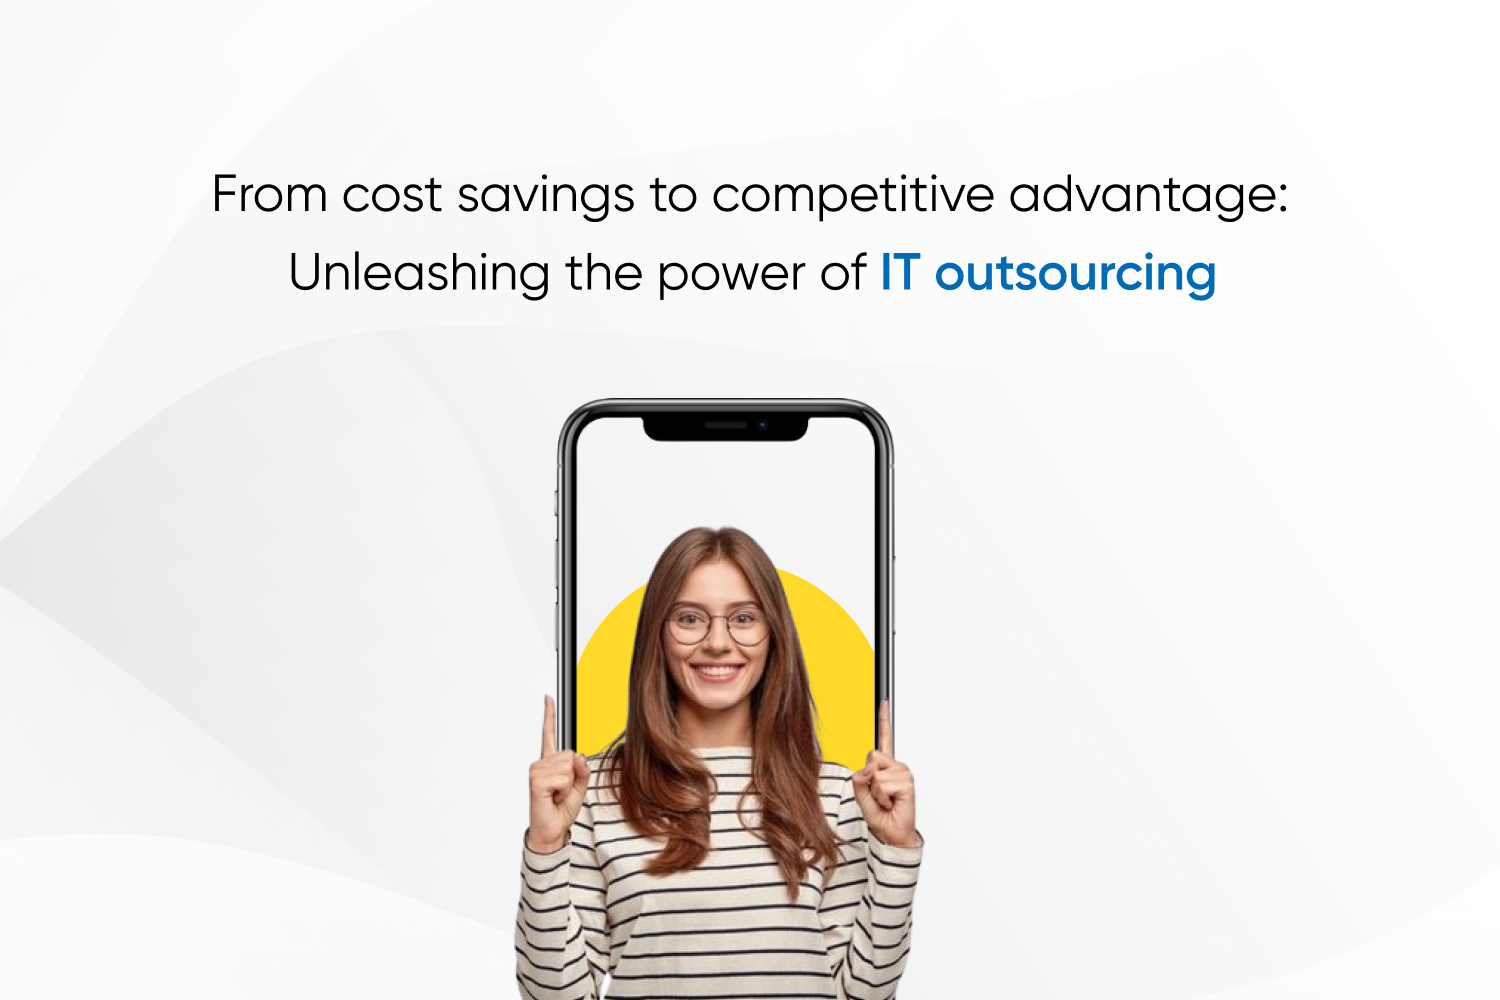 From cost savings to competitive advantage: Unleashing the power of IT outsourcing